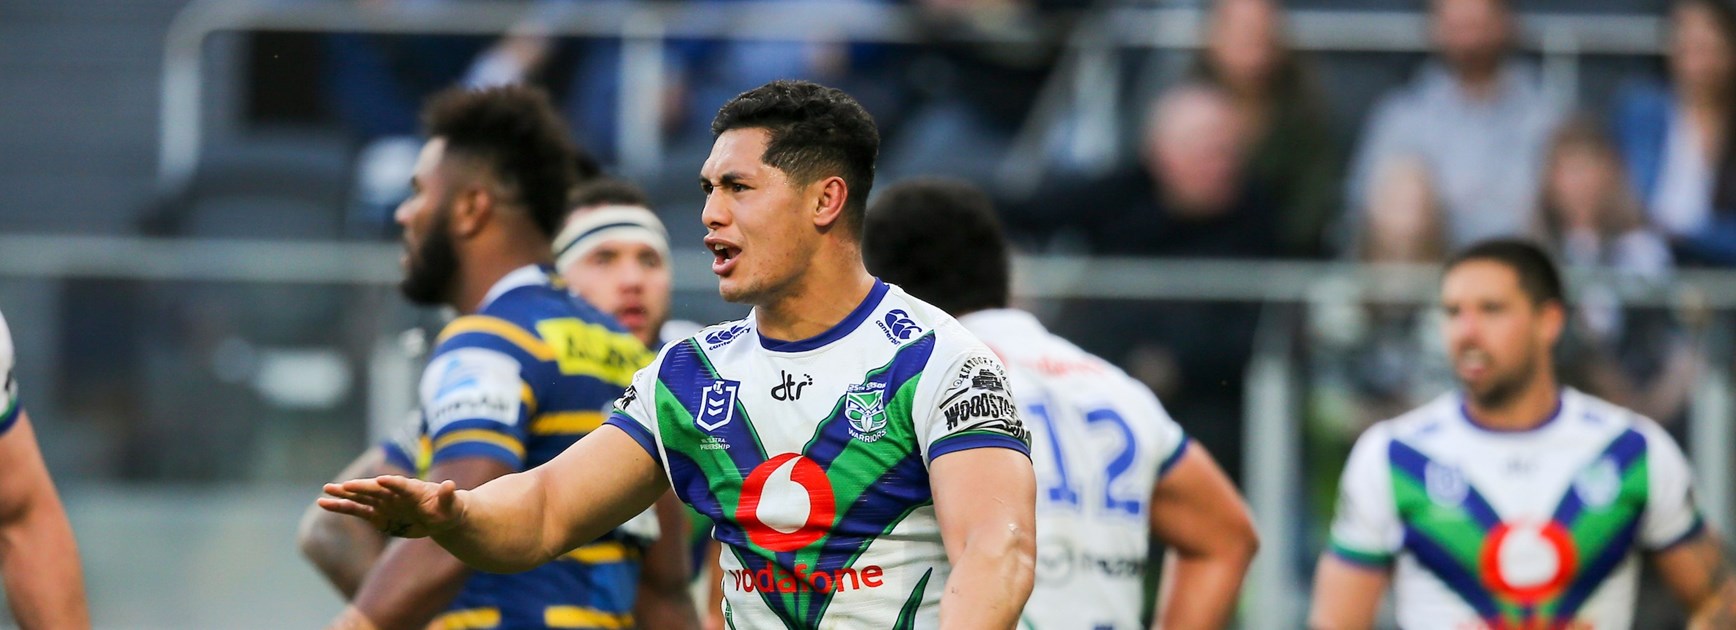 Eels hang on to clinch thriller against Warriors